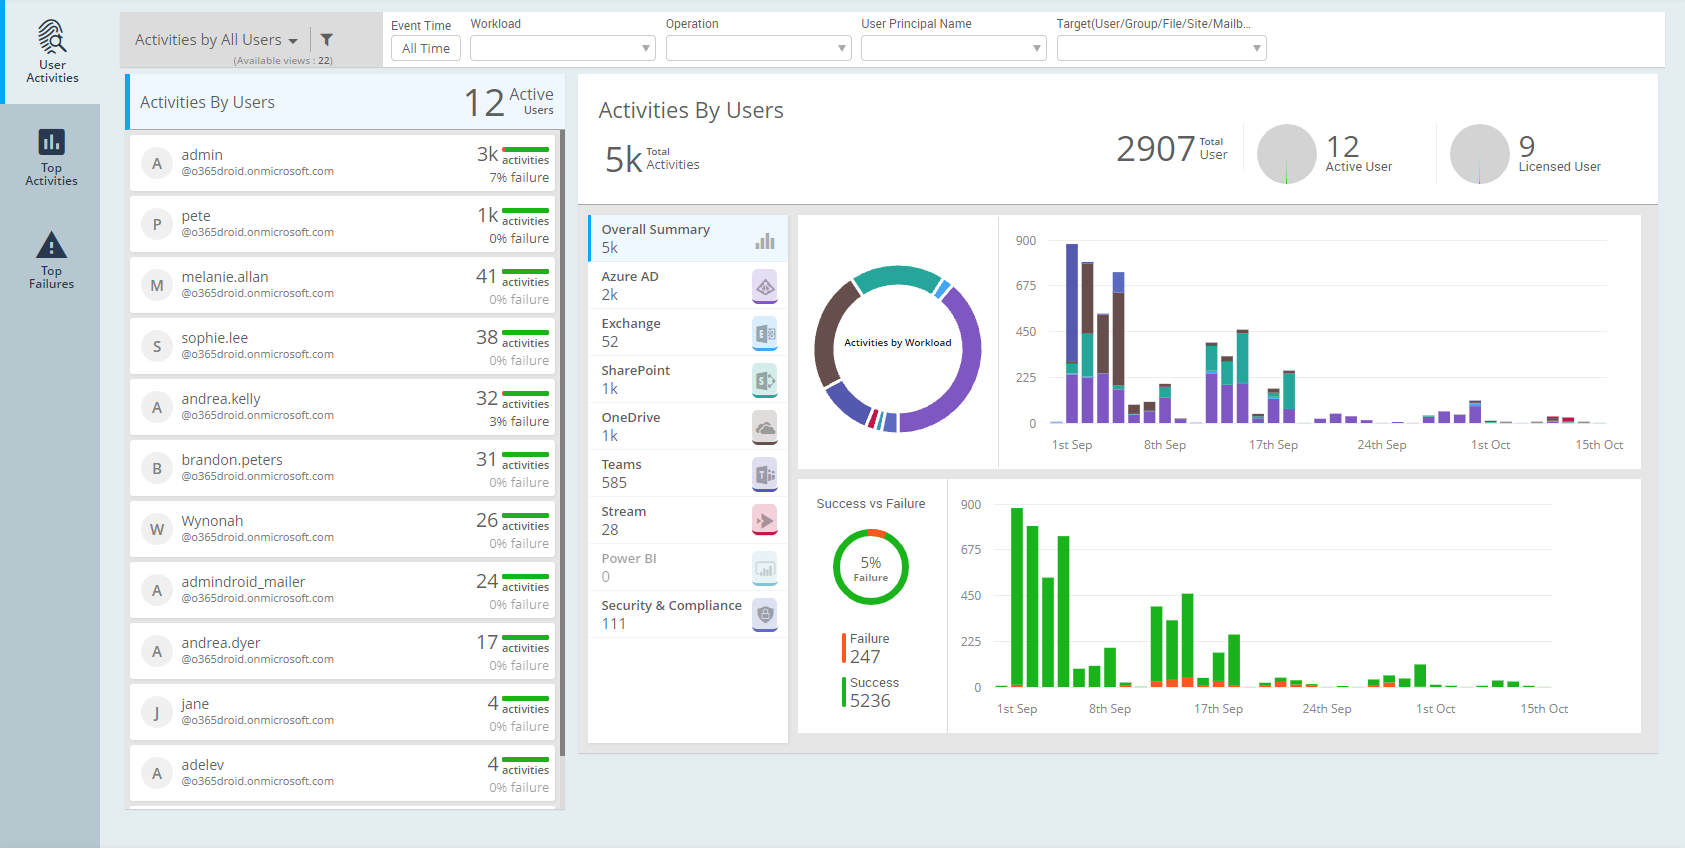 AdminDroid Office 365 Reporter Software - User Activity Dashboard